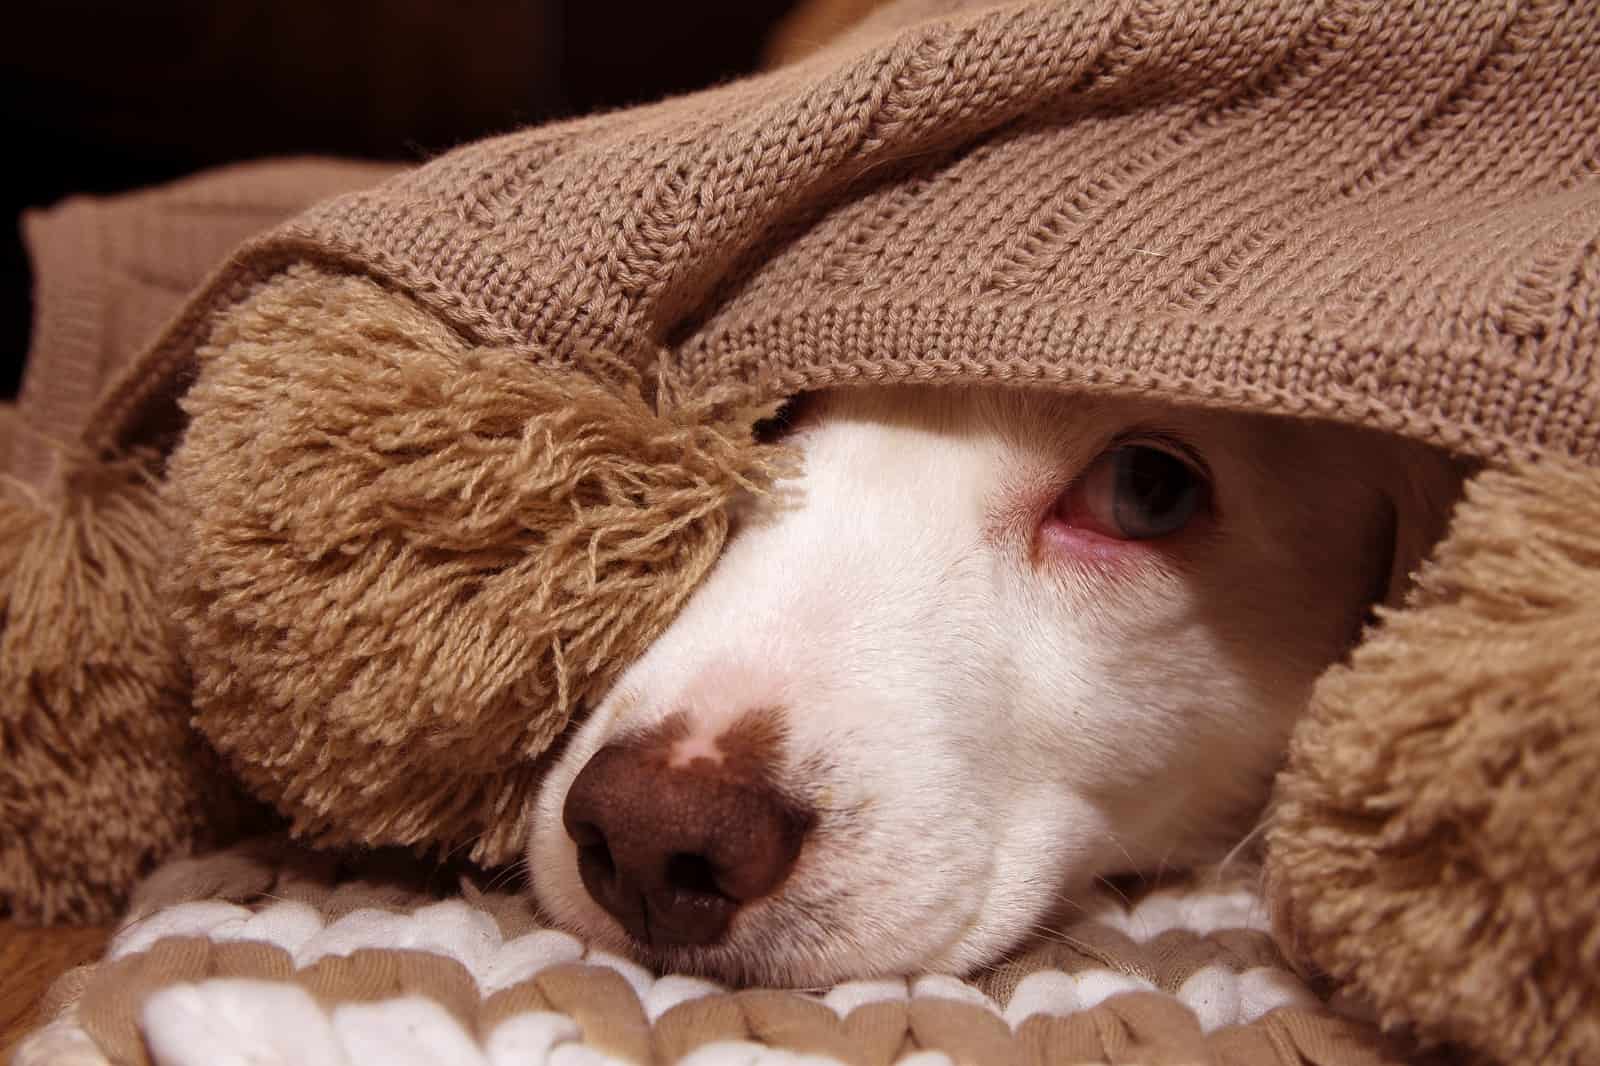 scared dog hiding under blanket on the bed